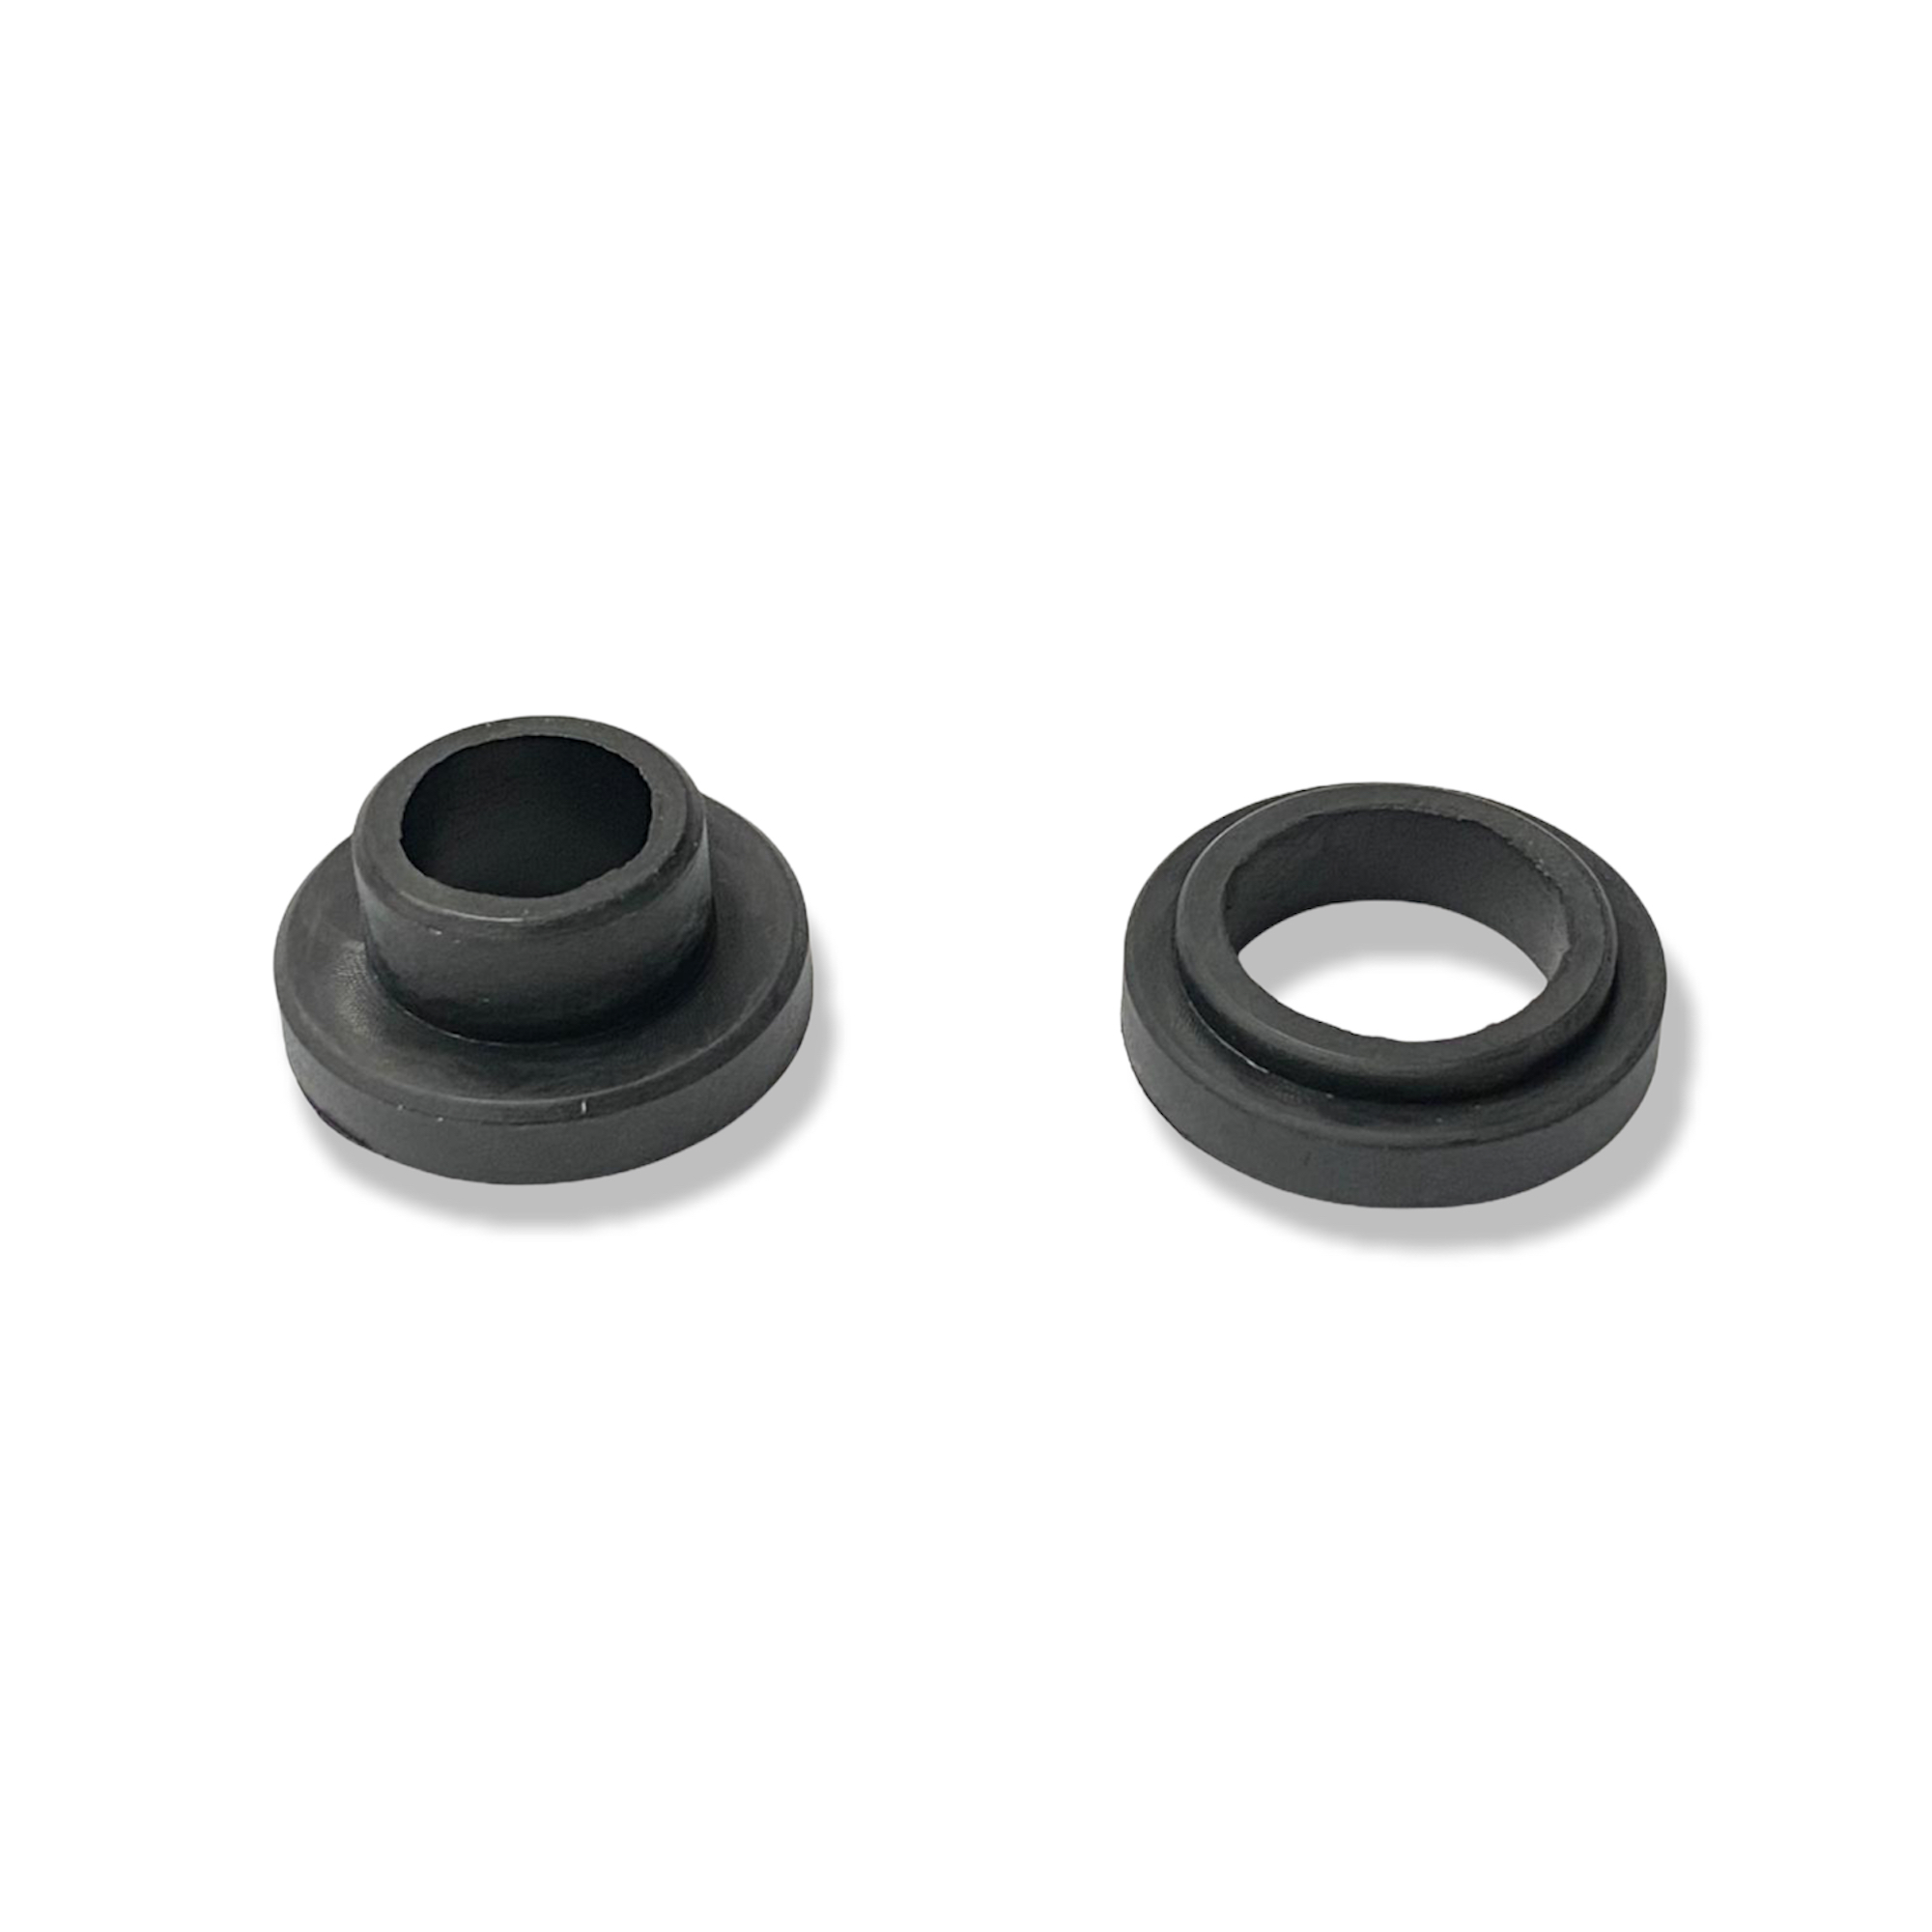 RUBBER WASHER (2PCS)